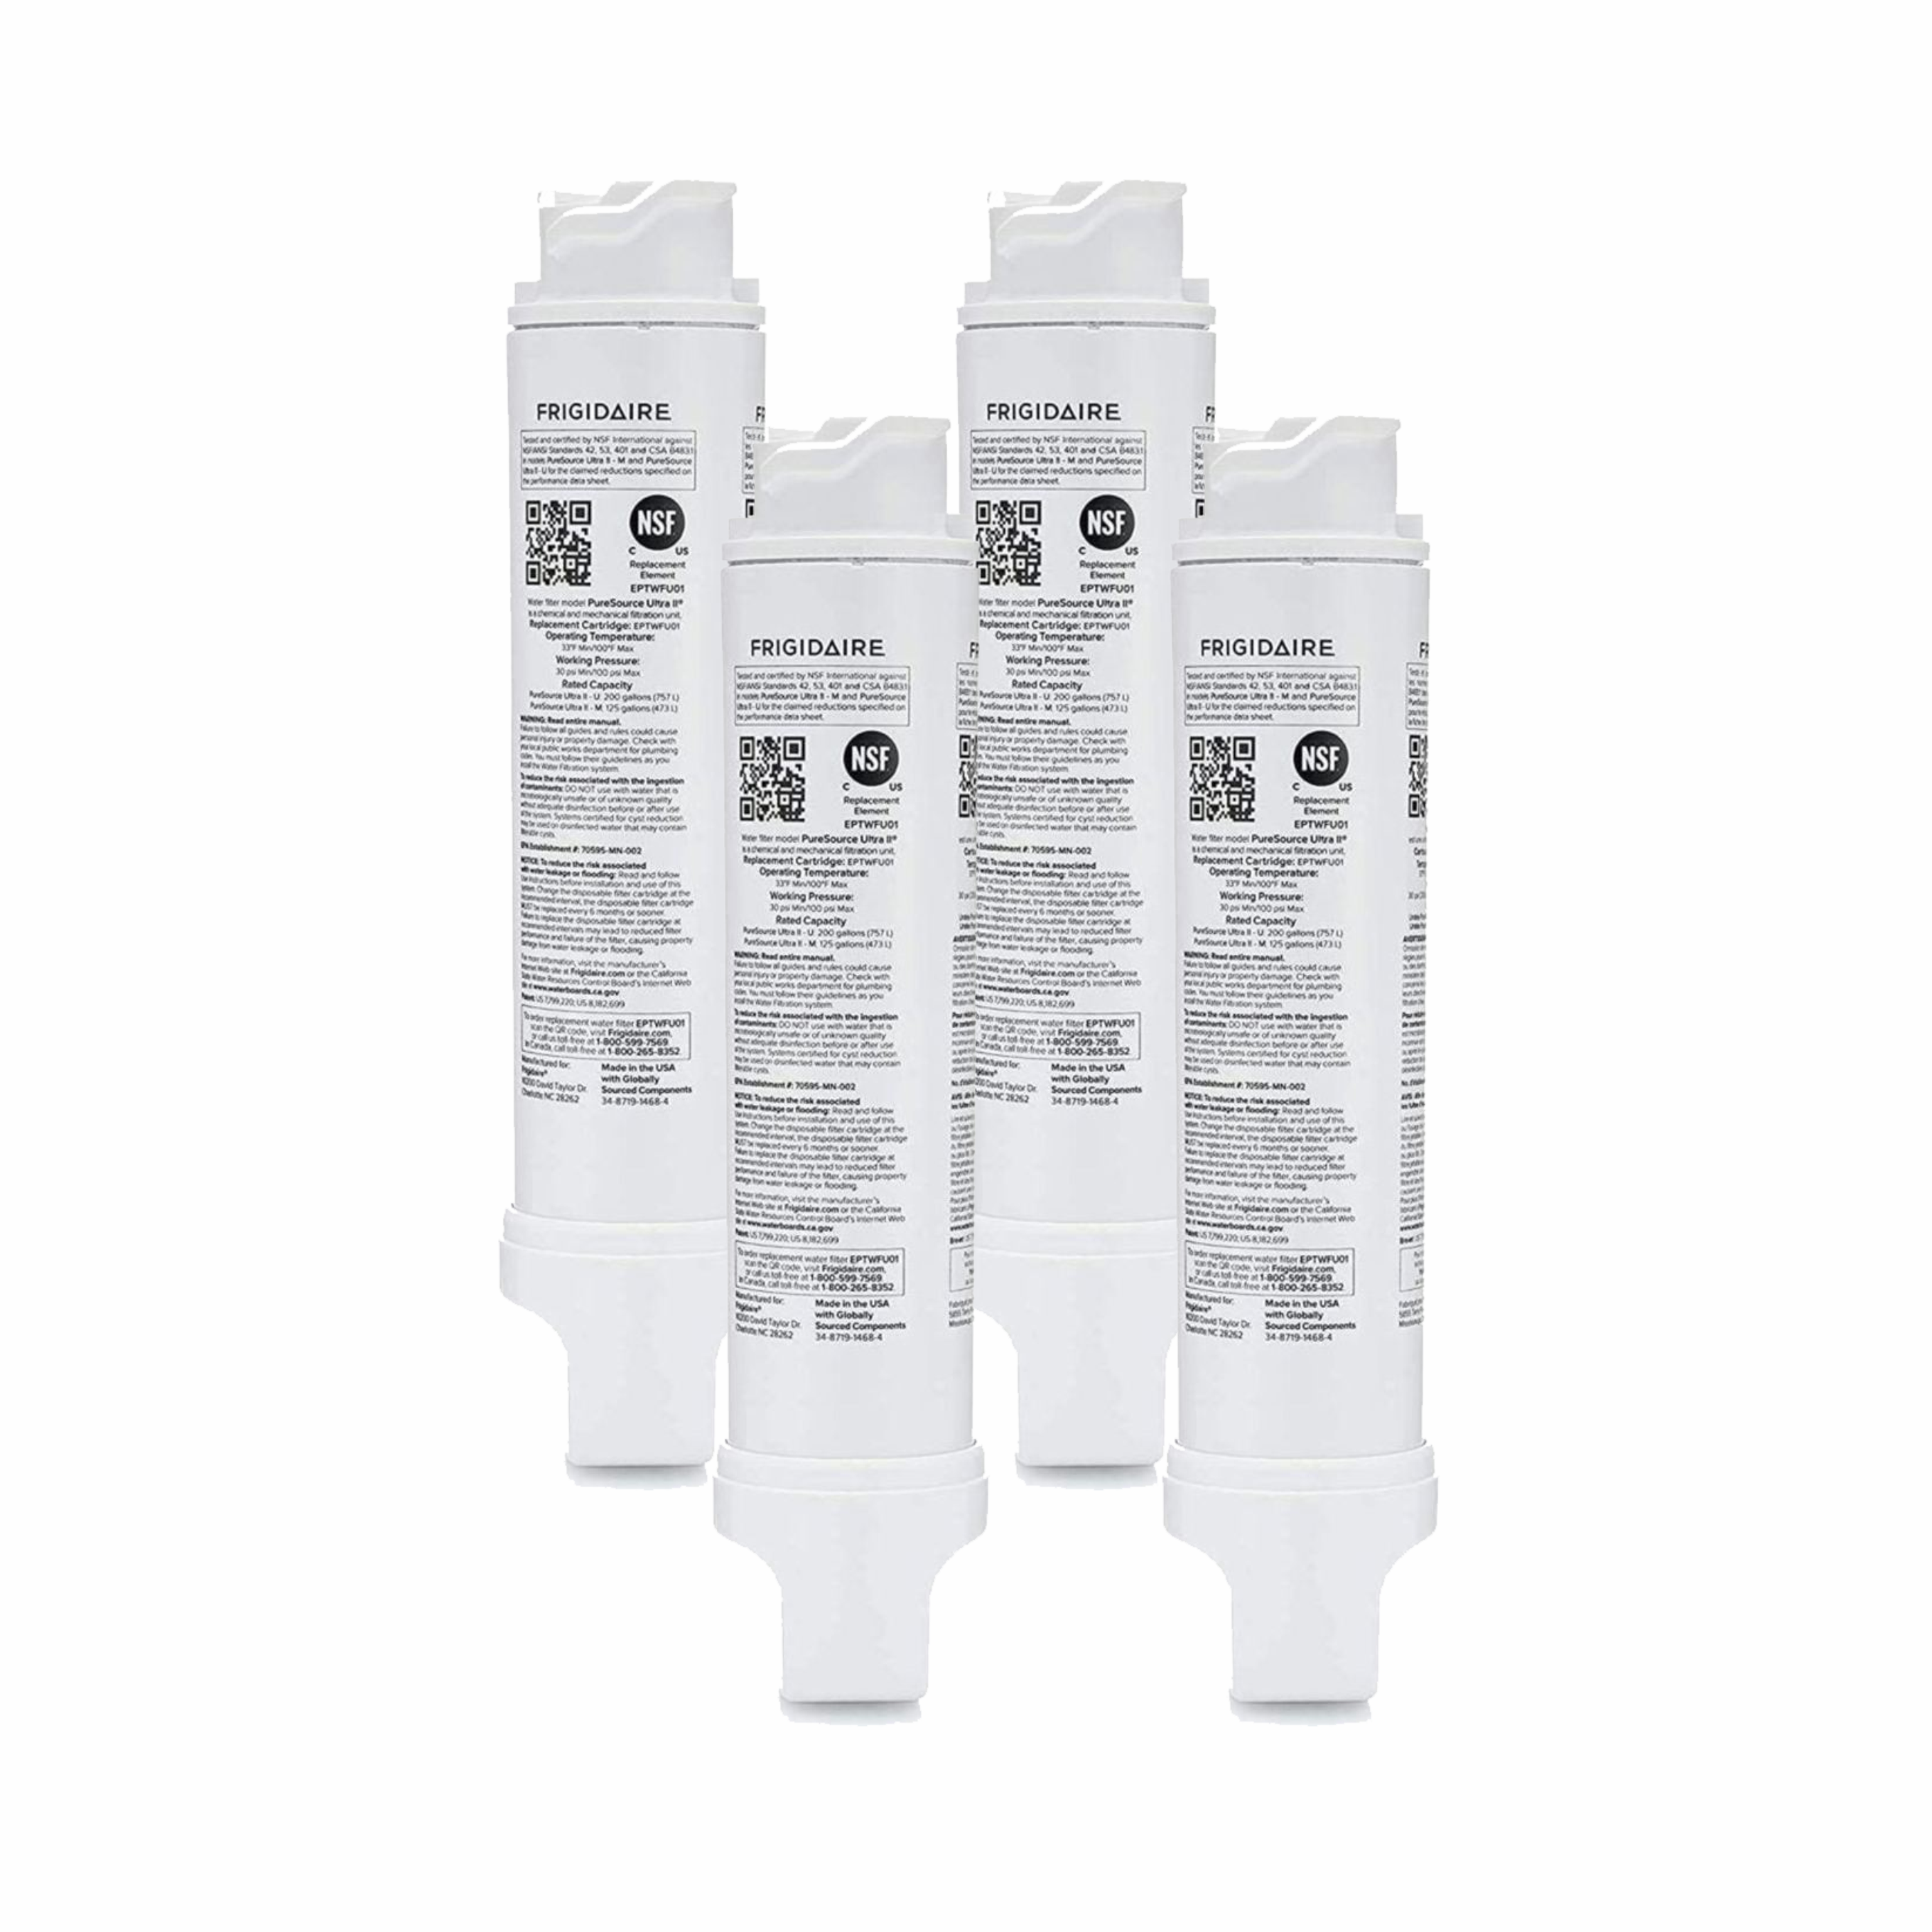 Frigidaire EPTWFU01 Water Filtration Filter Replacement